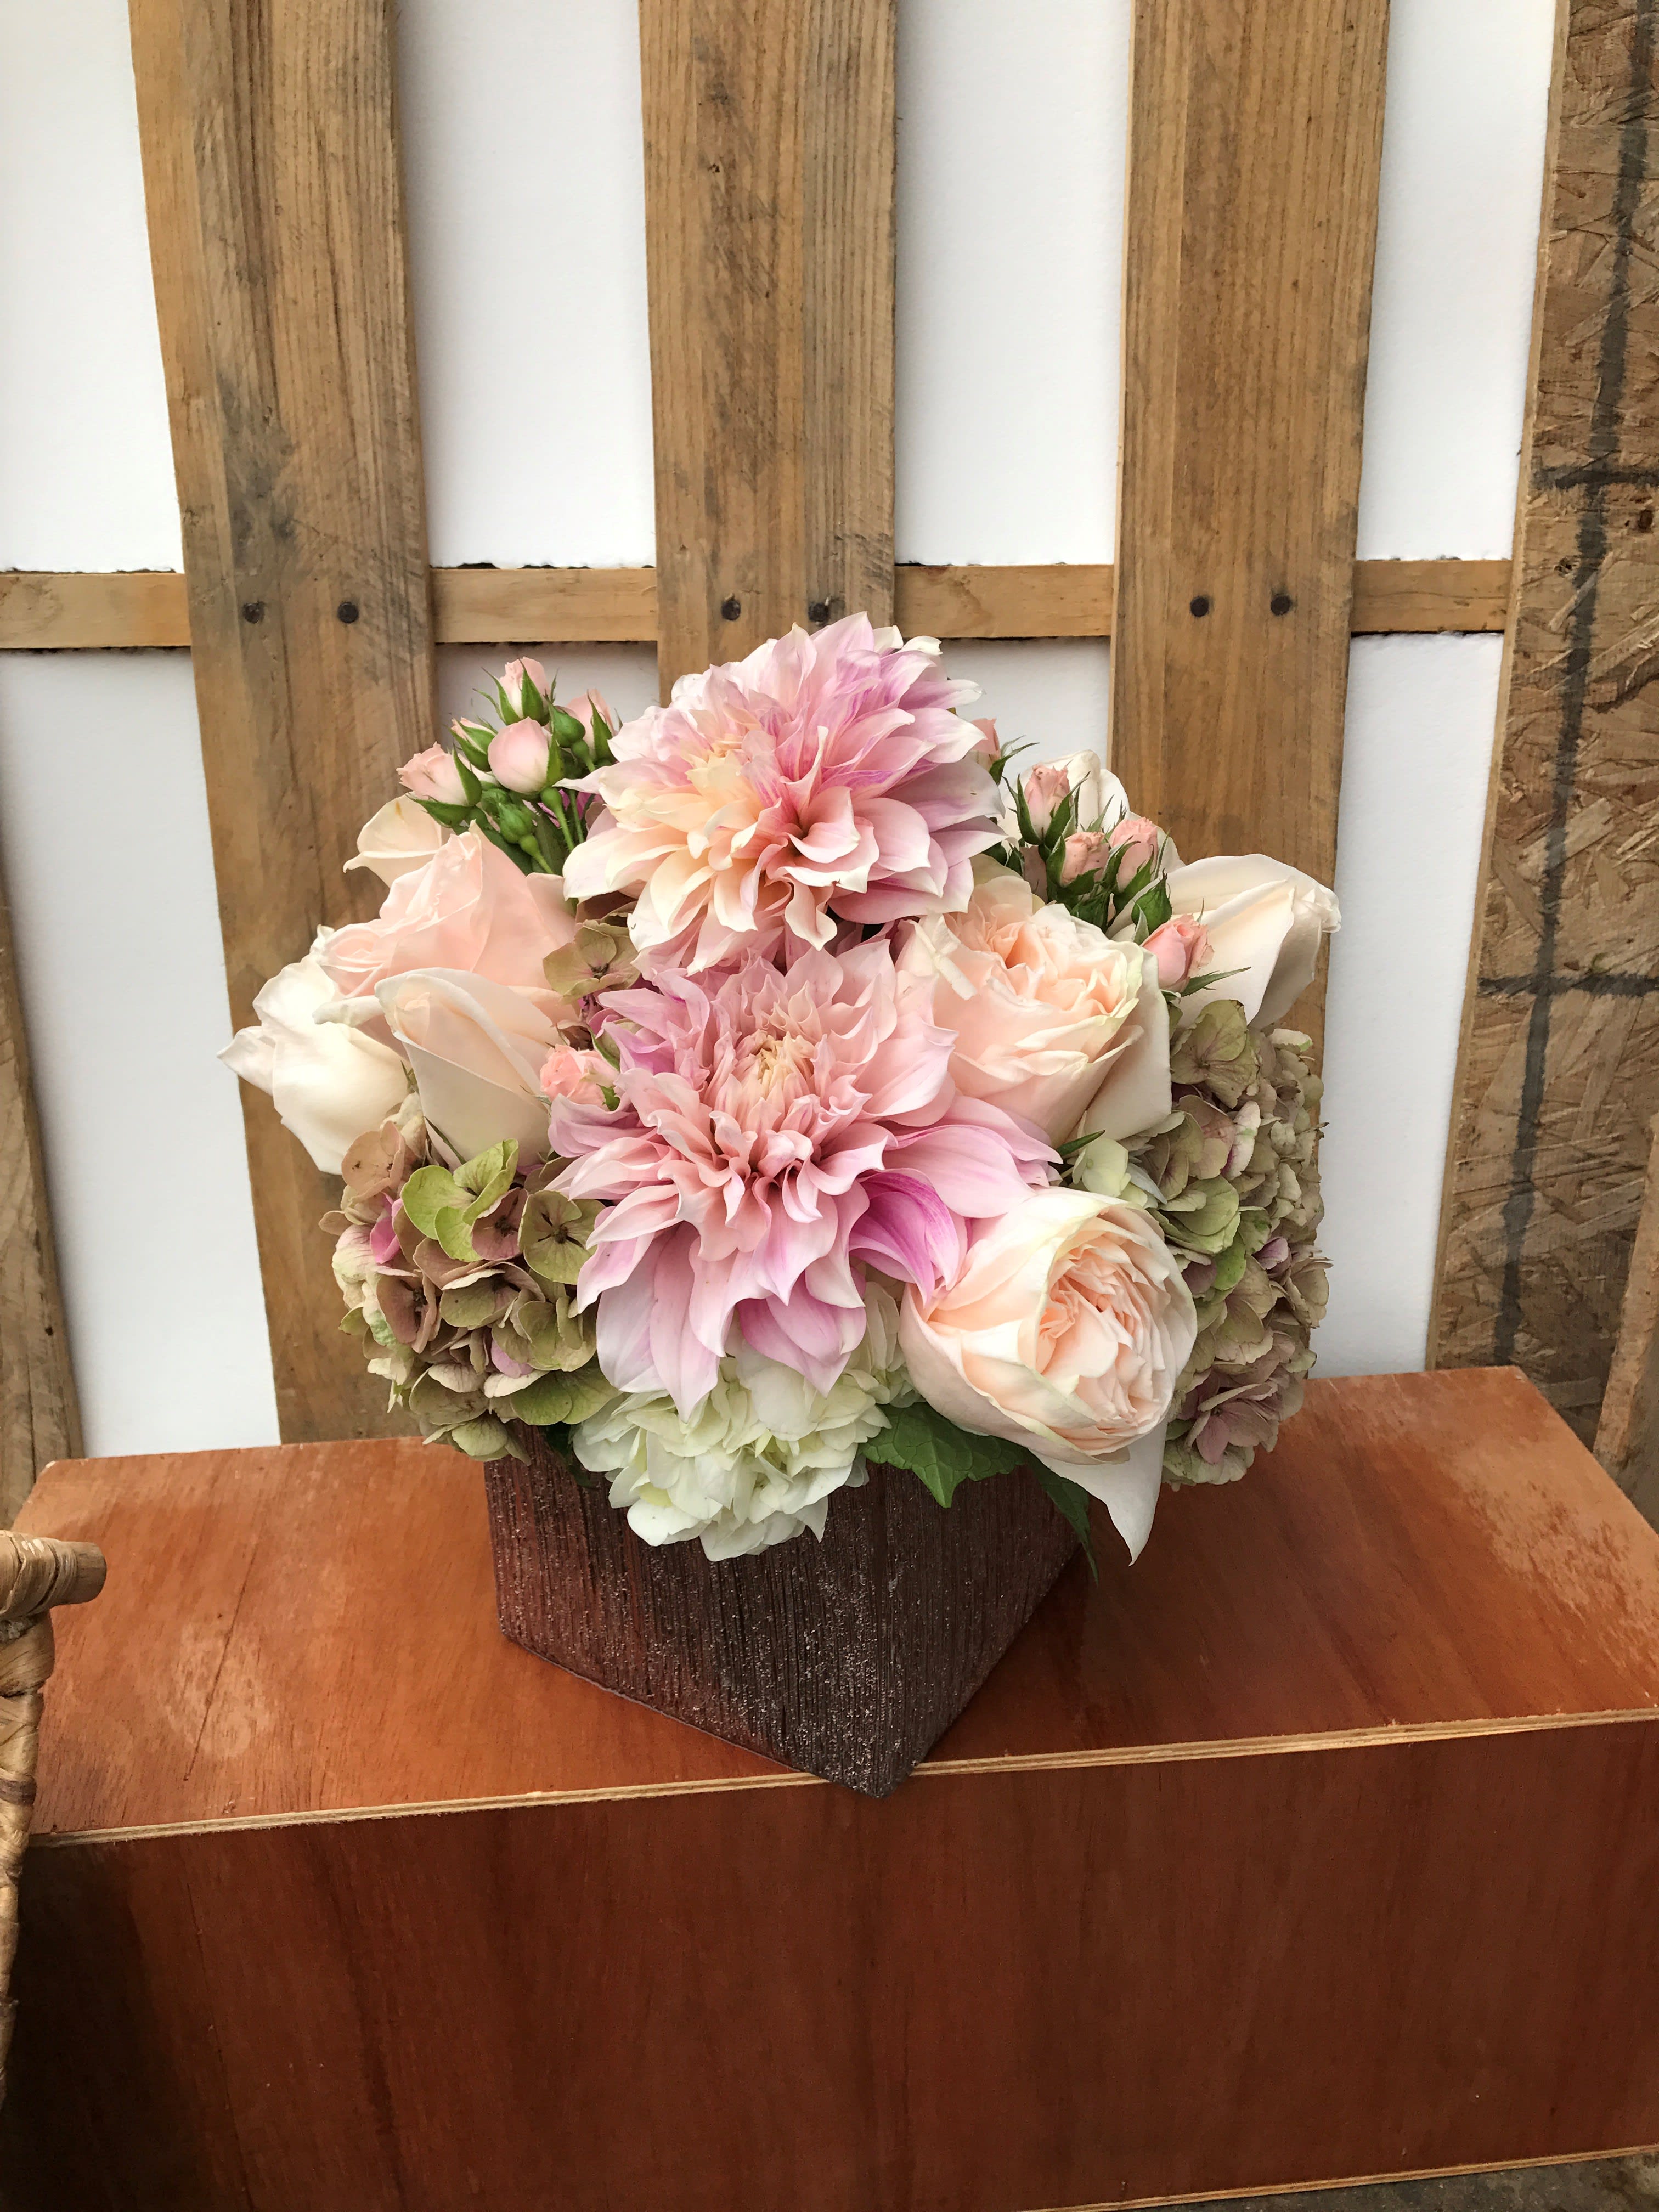 Pretty In Pink - Blush roses, dahlias and orchids all in the blush to pink tones